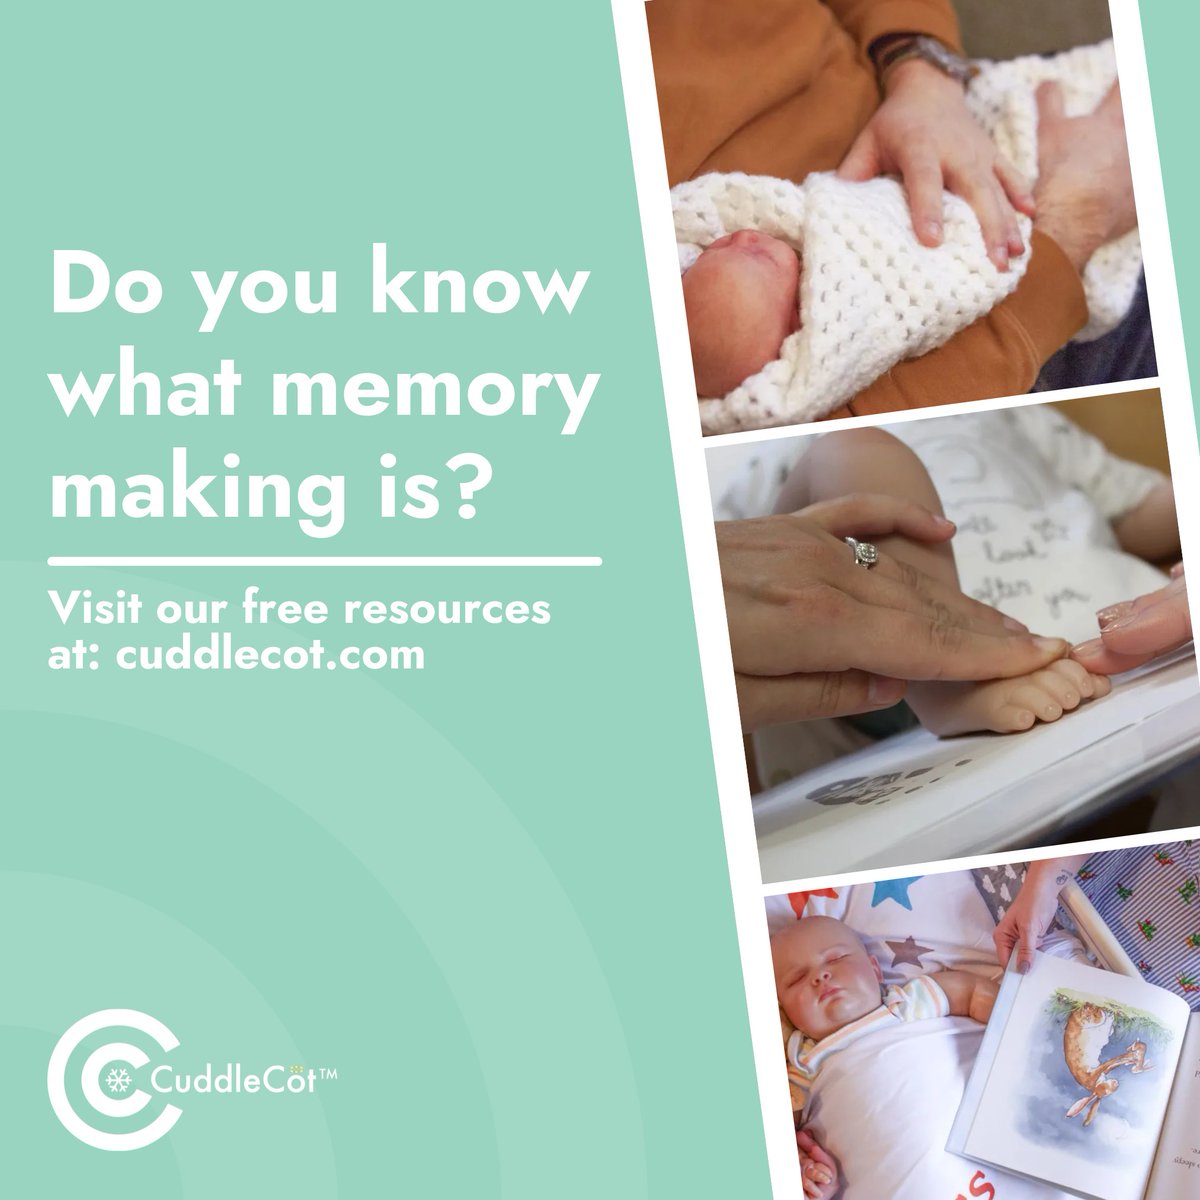 Memory making is at the heart of the #CuddleCot, offering precious moments for bereaved families to cherish. With the CuddleCot, families have the opportunity to create lasting memories. Visit cuddlecot.com  #MemoryMaking #BereavedFamilies #CherishedMemories #BabyLoss